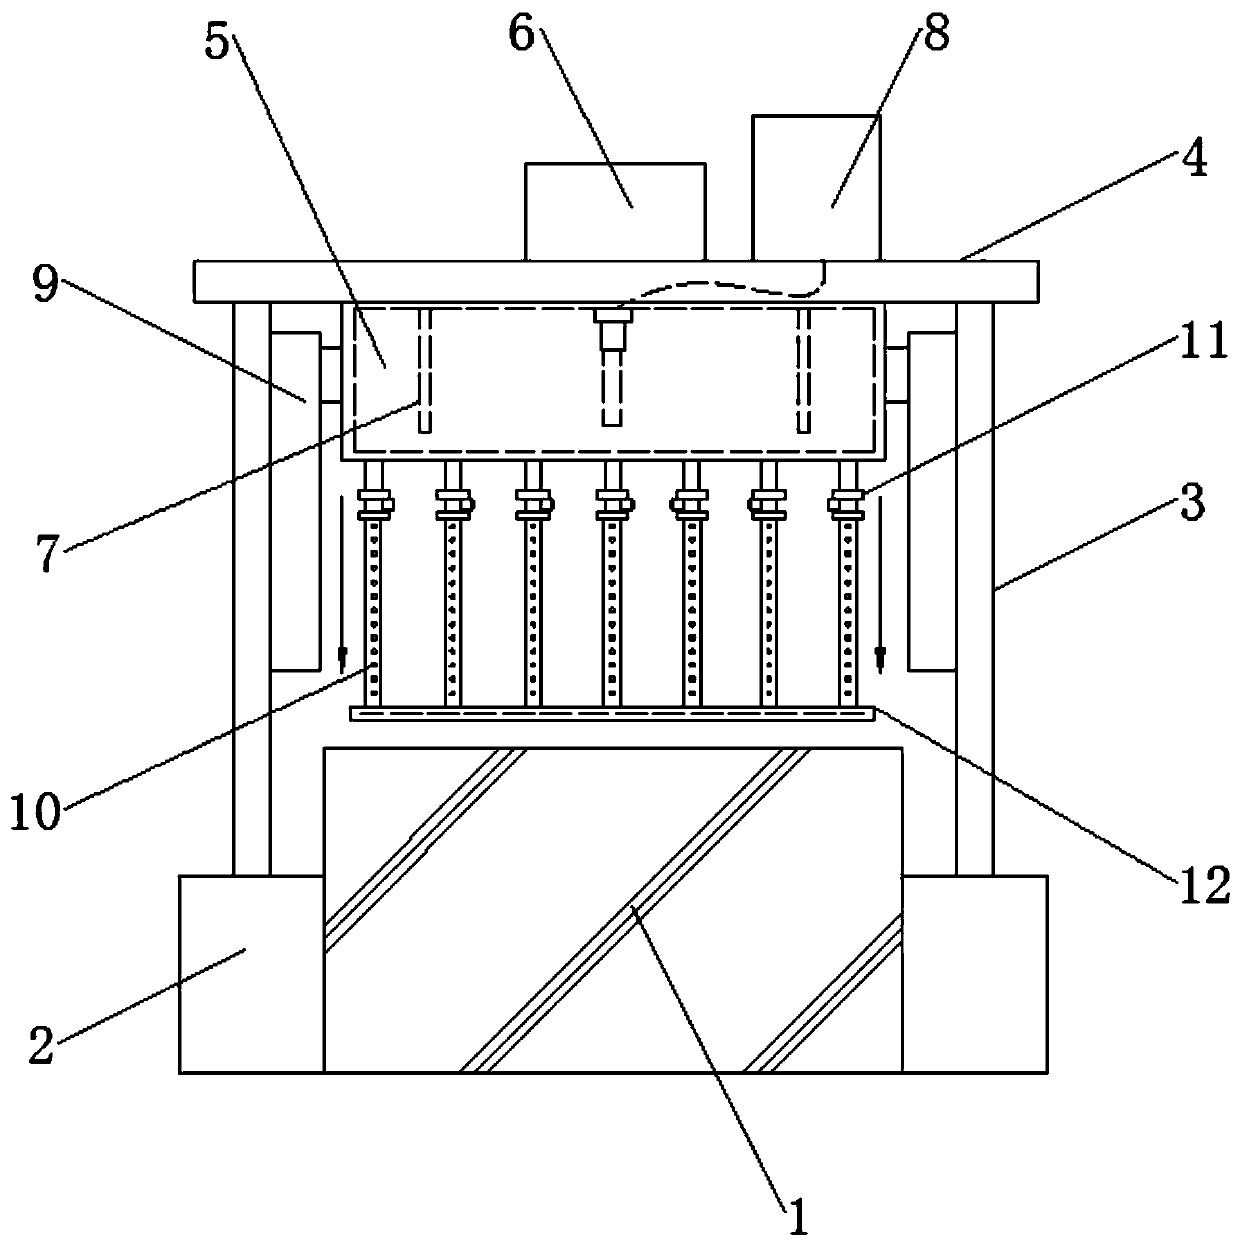 Process for optimizing nickel-plated appearance of ultra-wide stainless steel plate